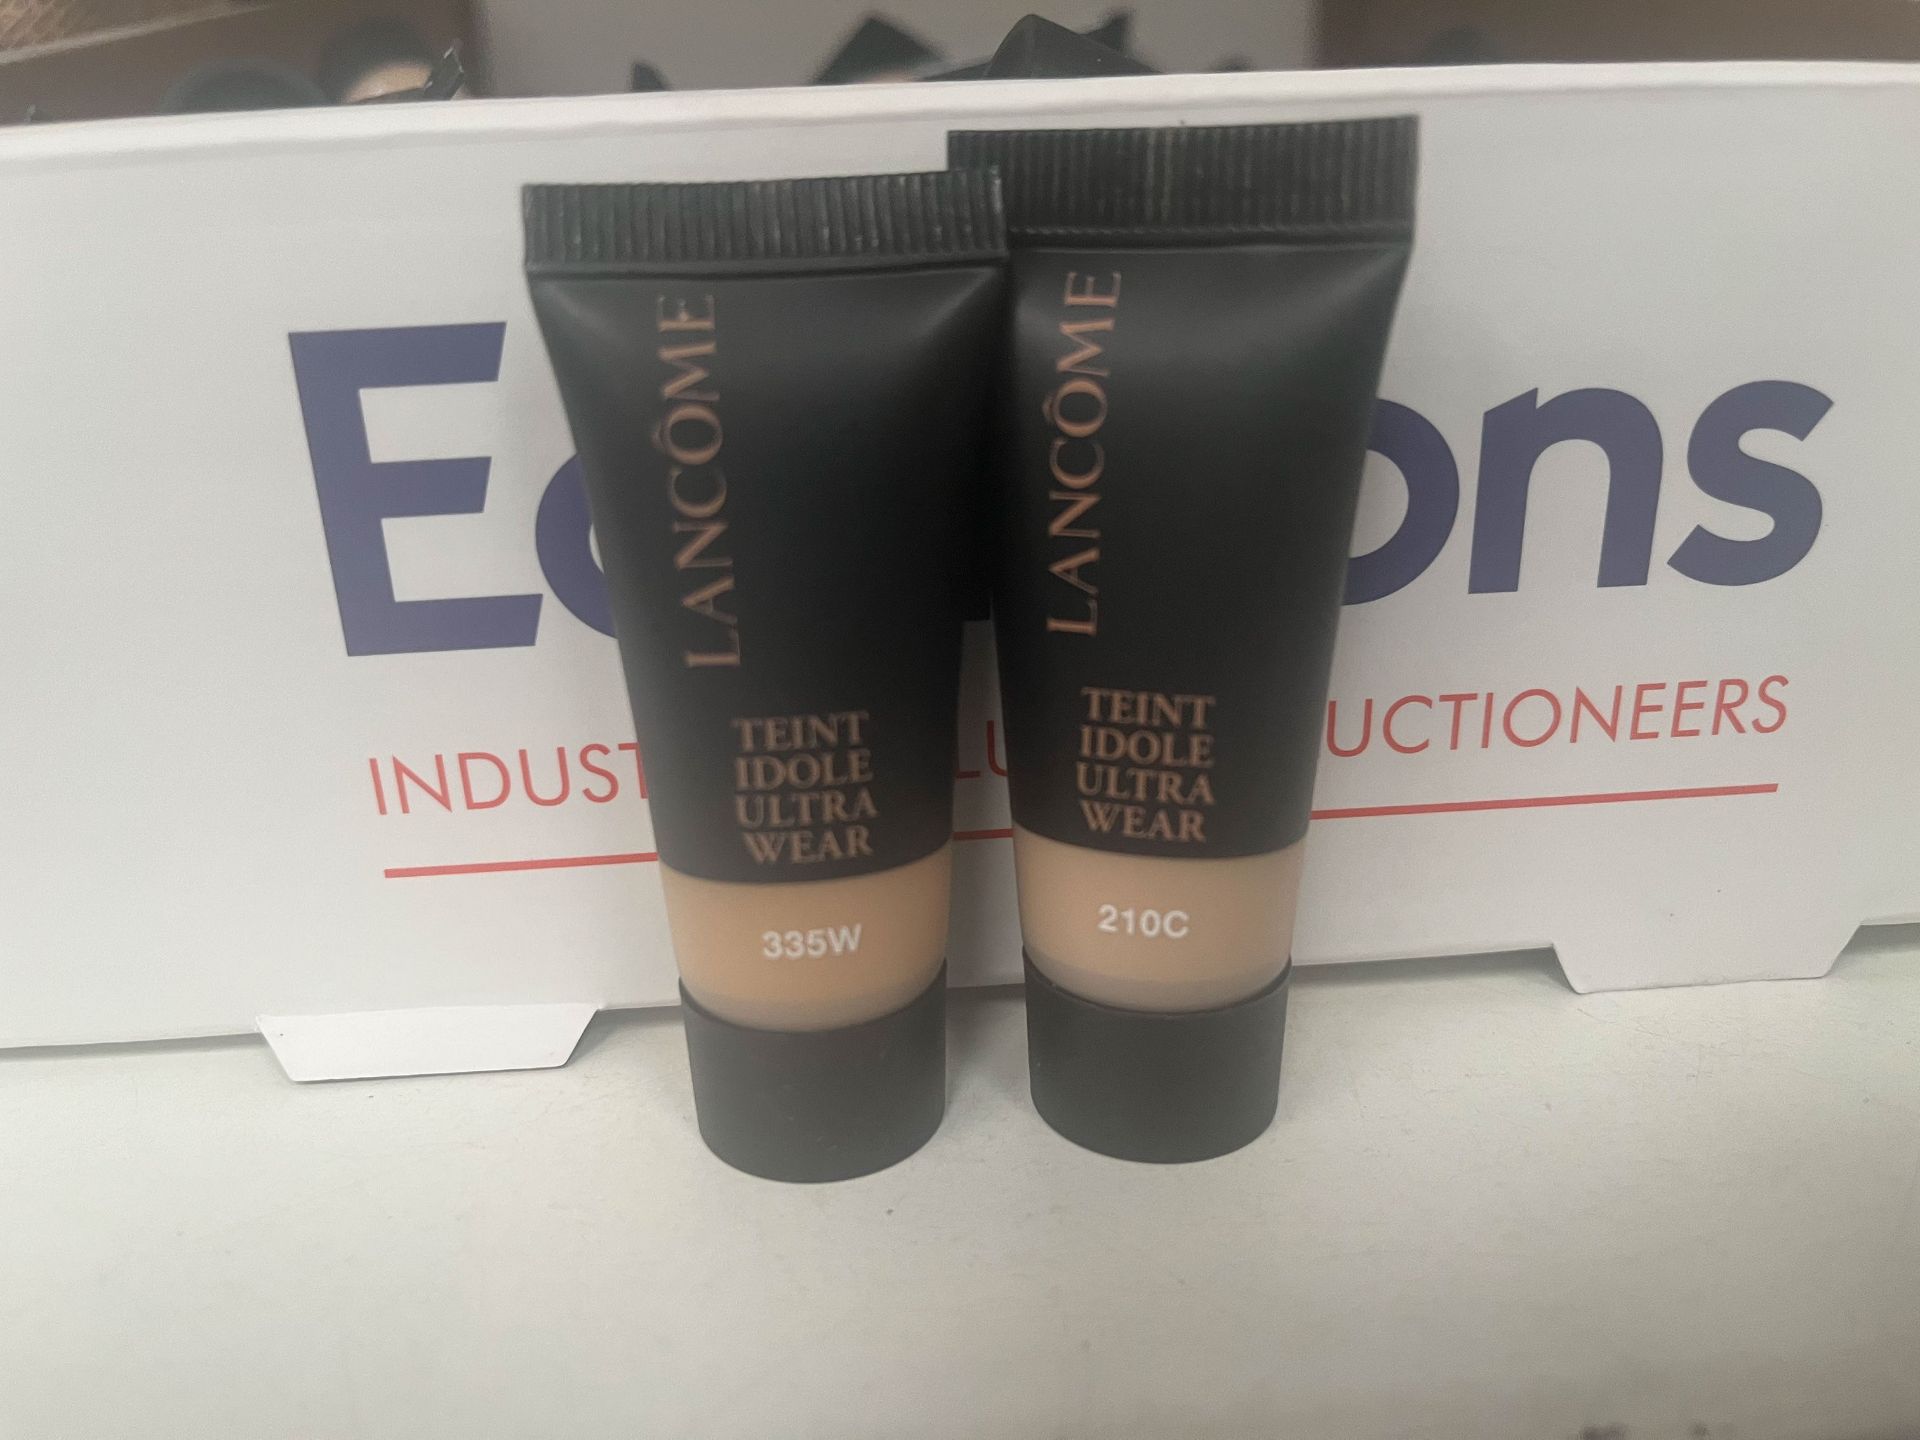 A Selection of Lancôme Foundation Testers - 5ml bottles - Image 5 of 5